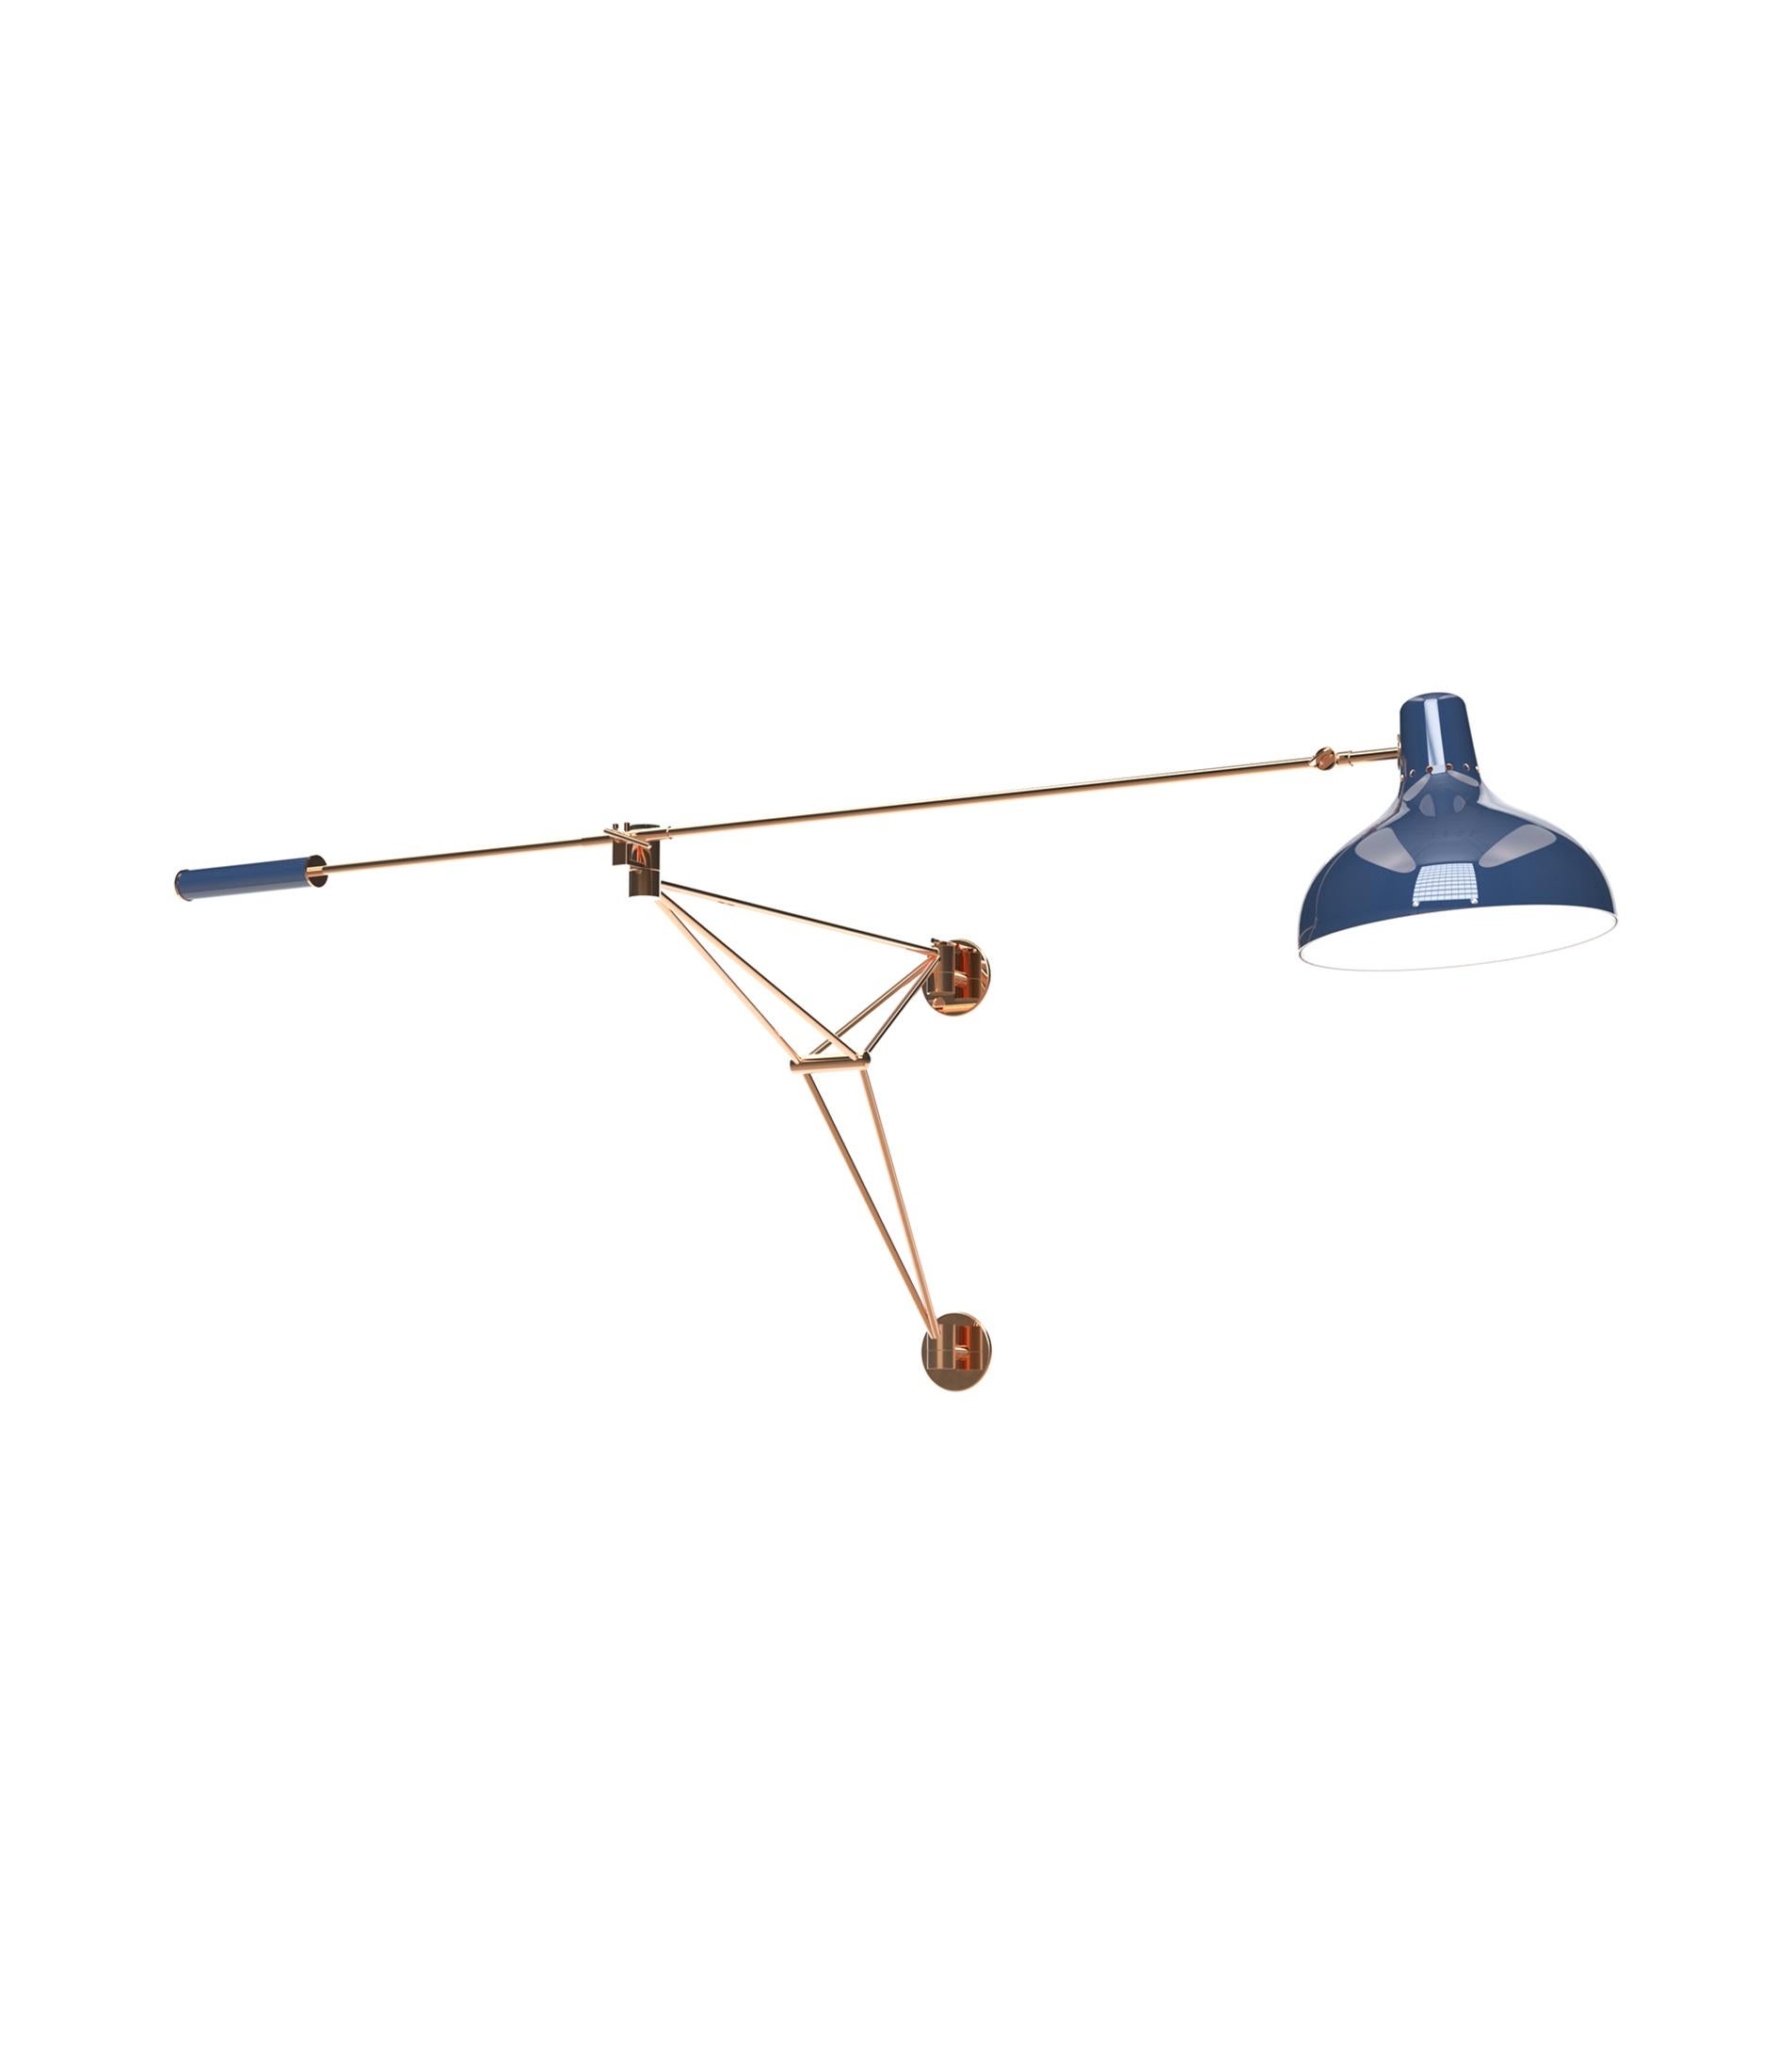 Diana is a vintage industrial wall lamp, inspired by the classic designs of the Mid-Century Modern age. A true Industrial Design icon, Diana has a mount and swing arm handmade in brass, with a lamp shade made in aluminum. The counterweight we find